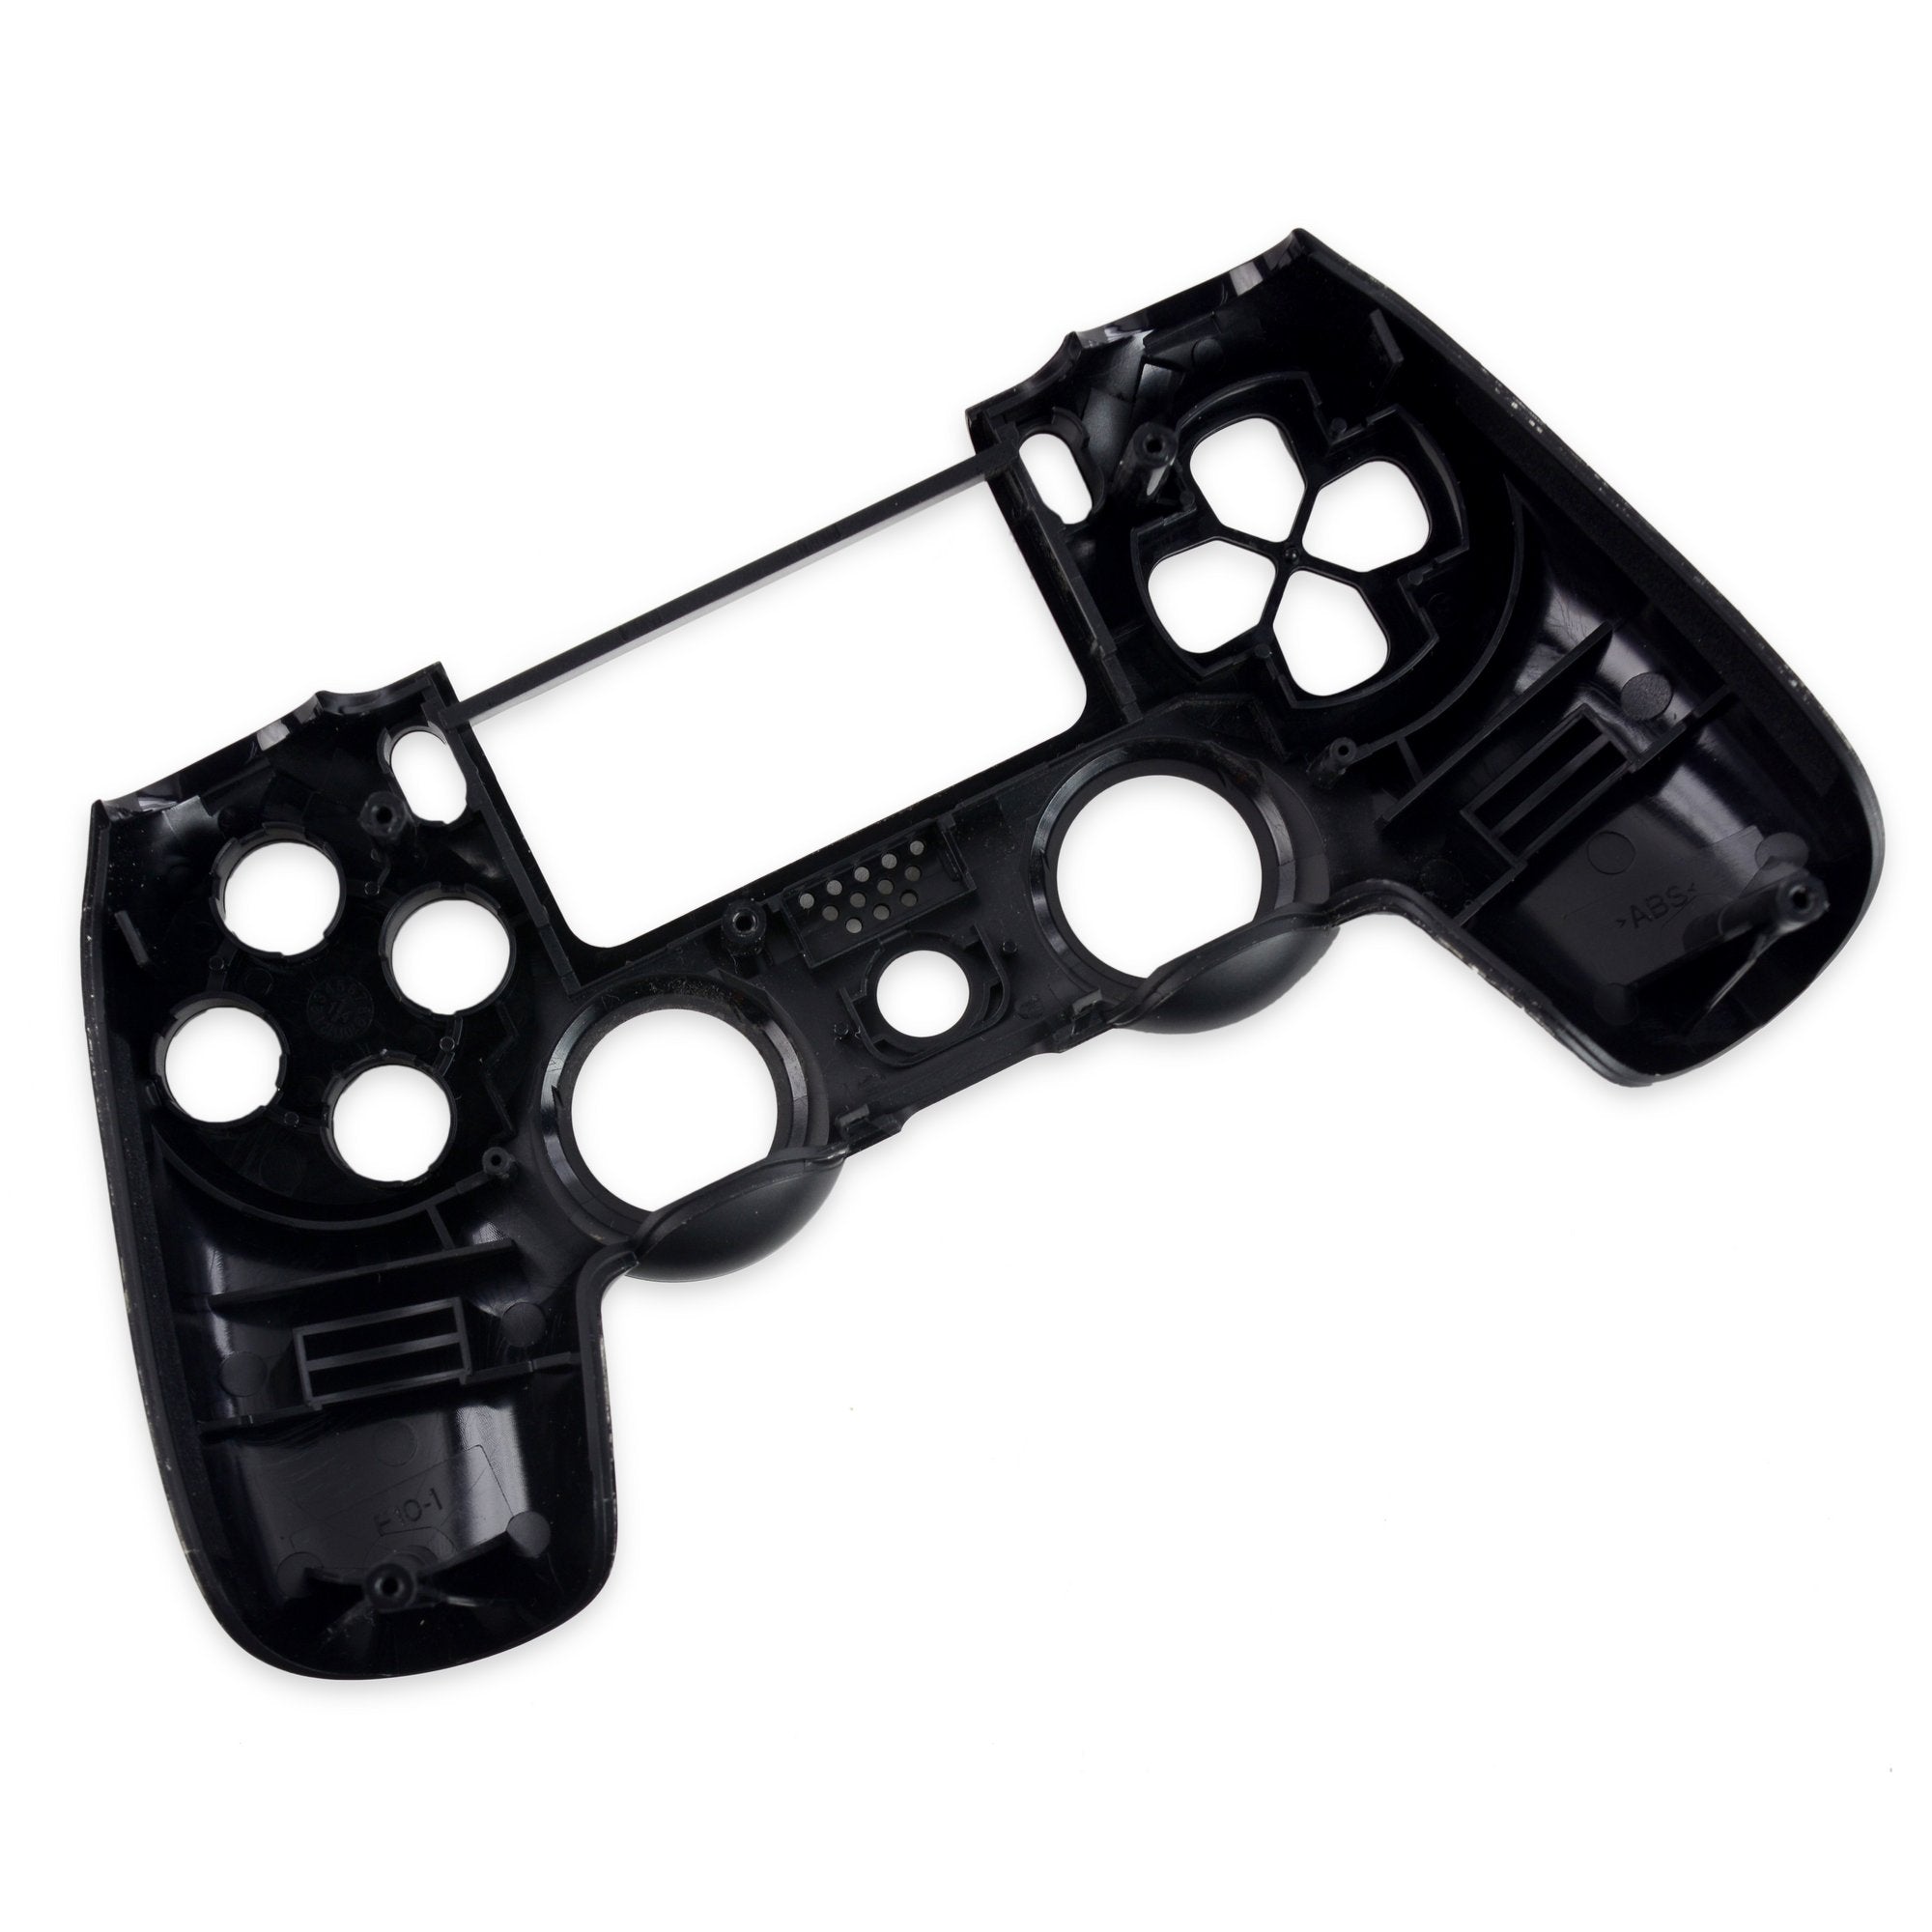 DualShock 4 Controller Front Panel (CUH-ZCT1) Black Used, A-Stock